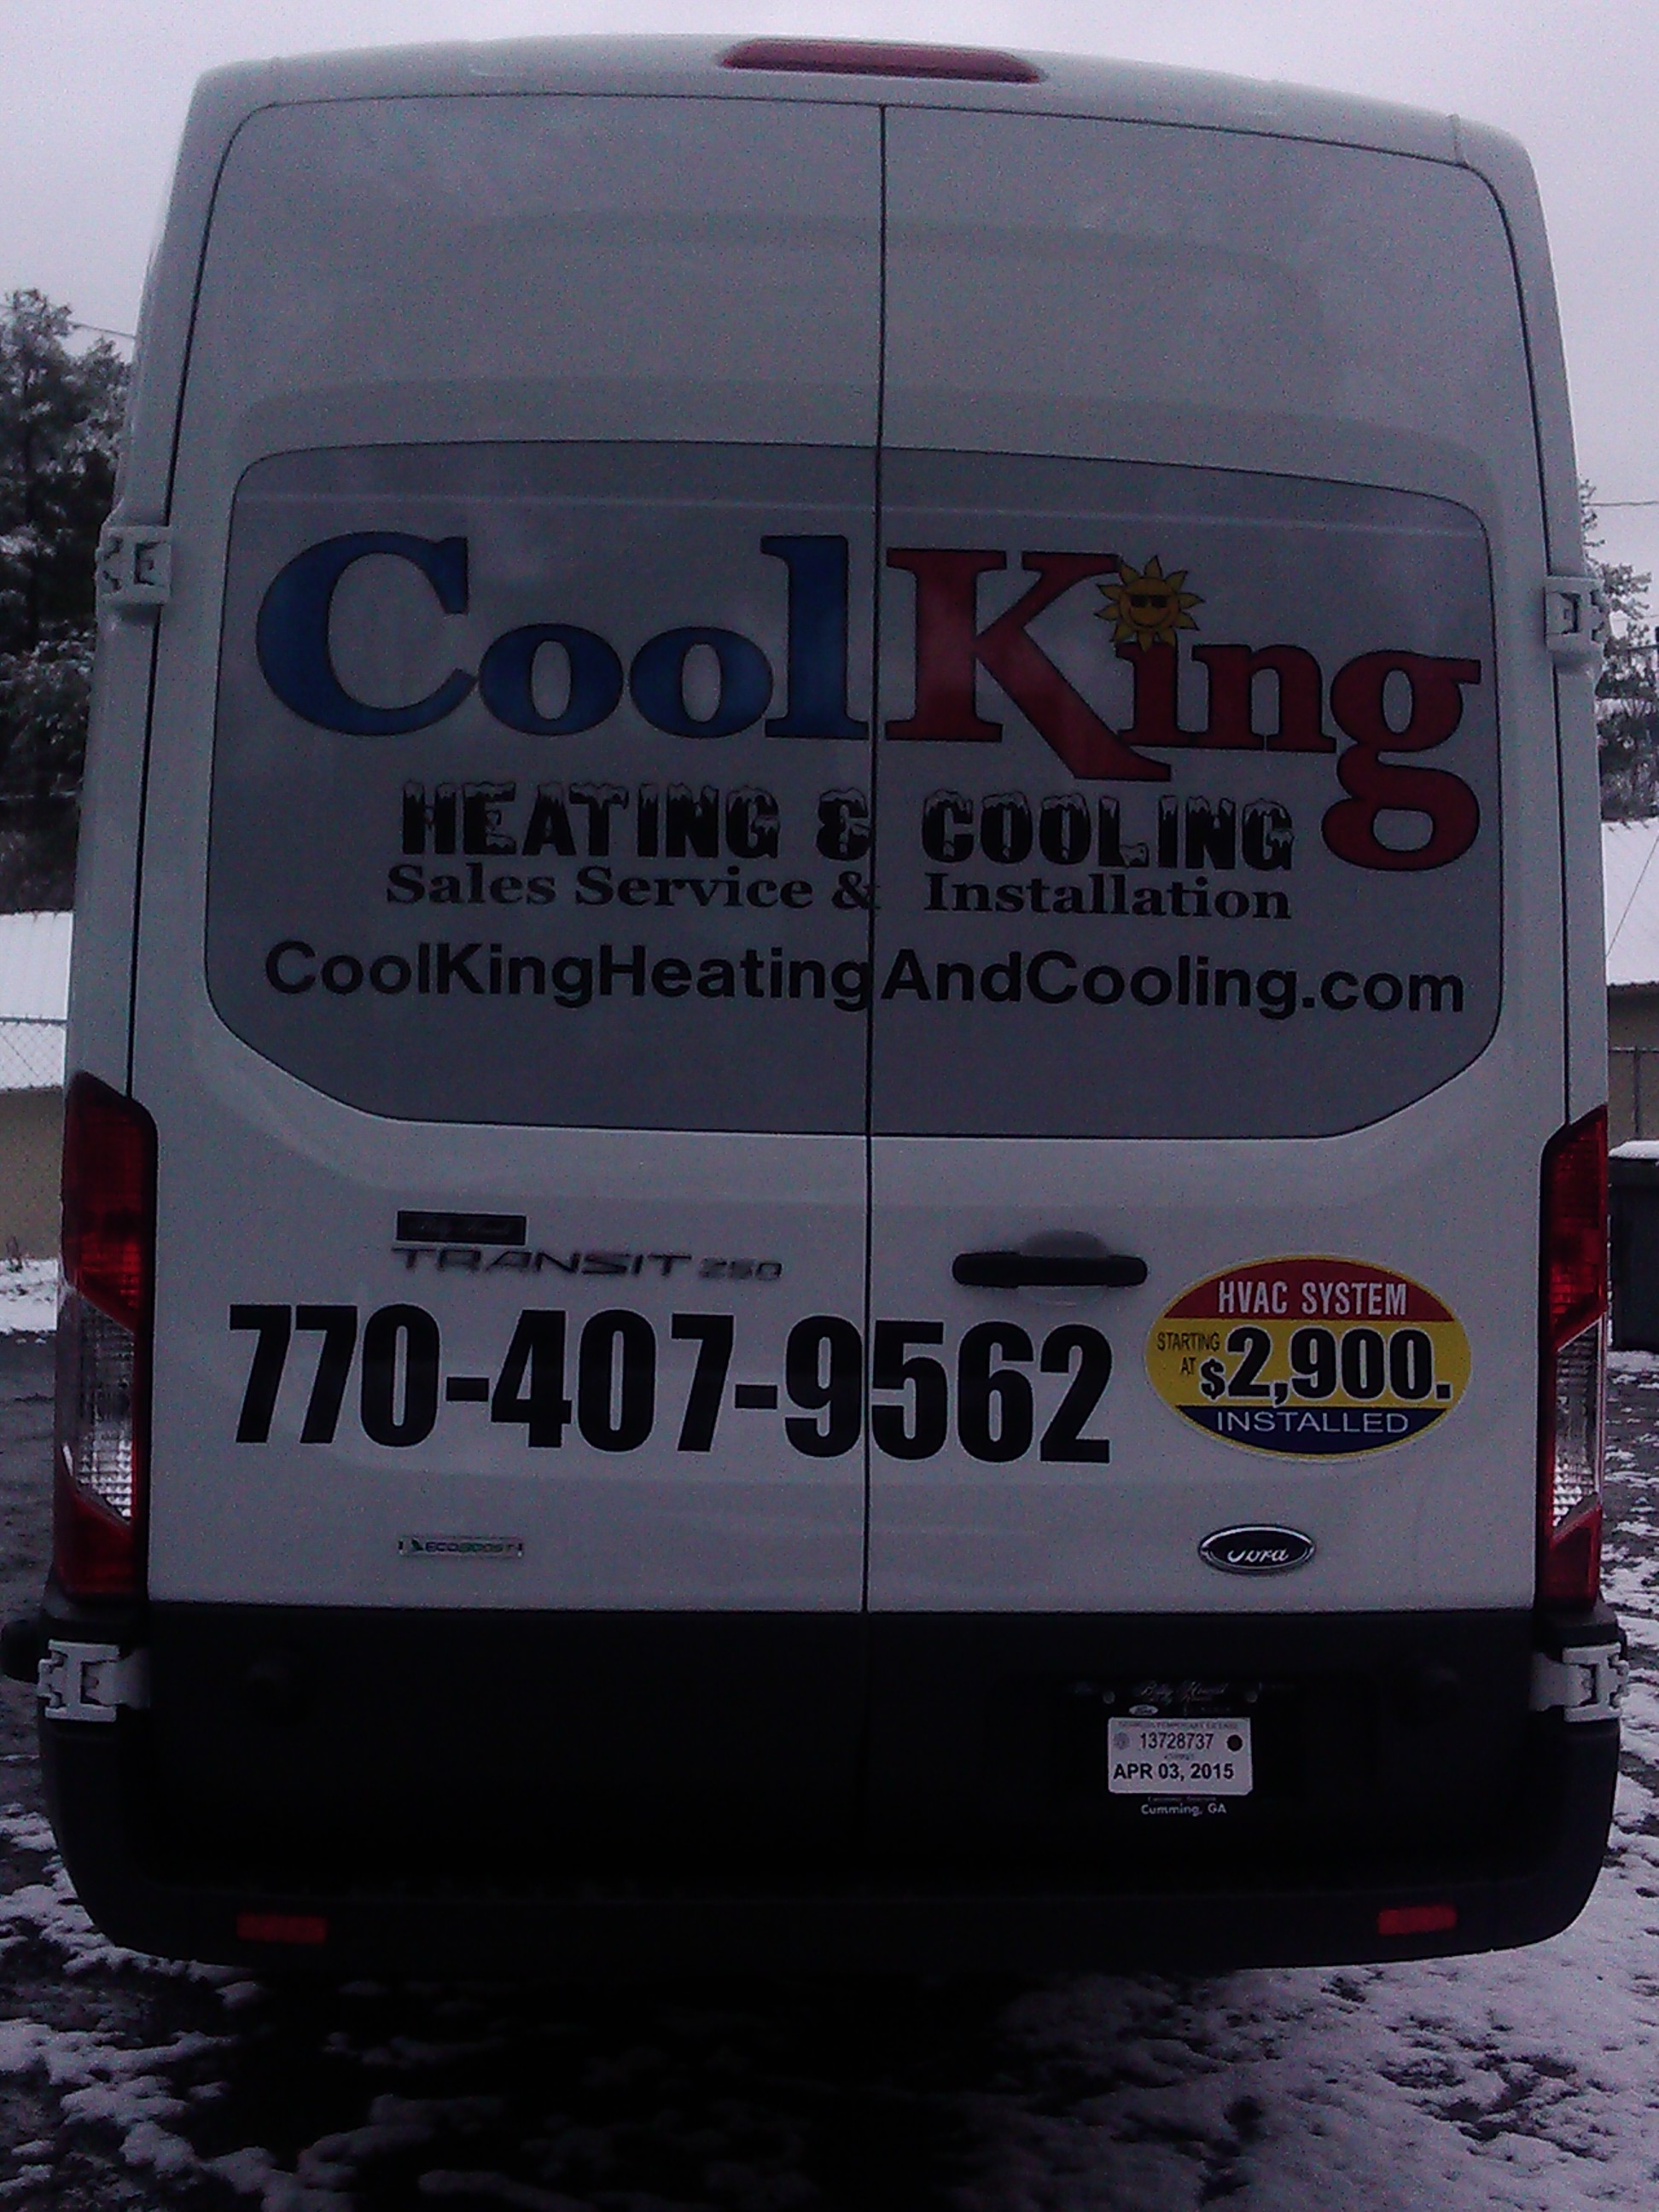 CoolKing heating & cooling - back.jpg